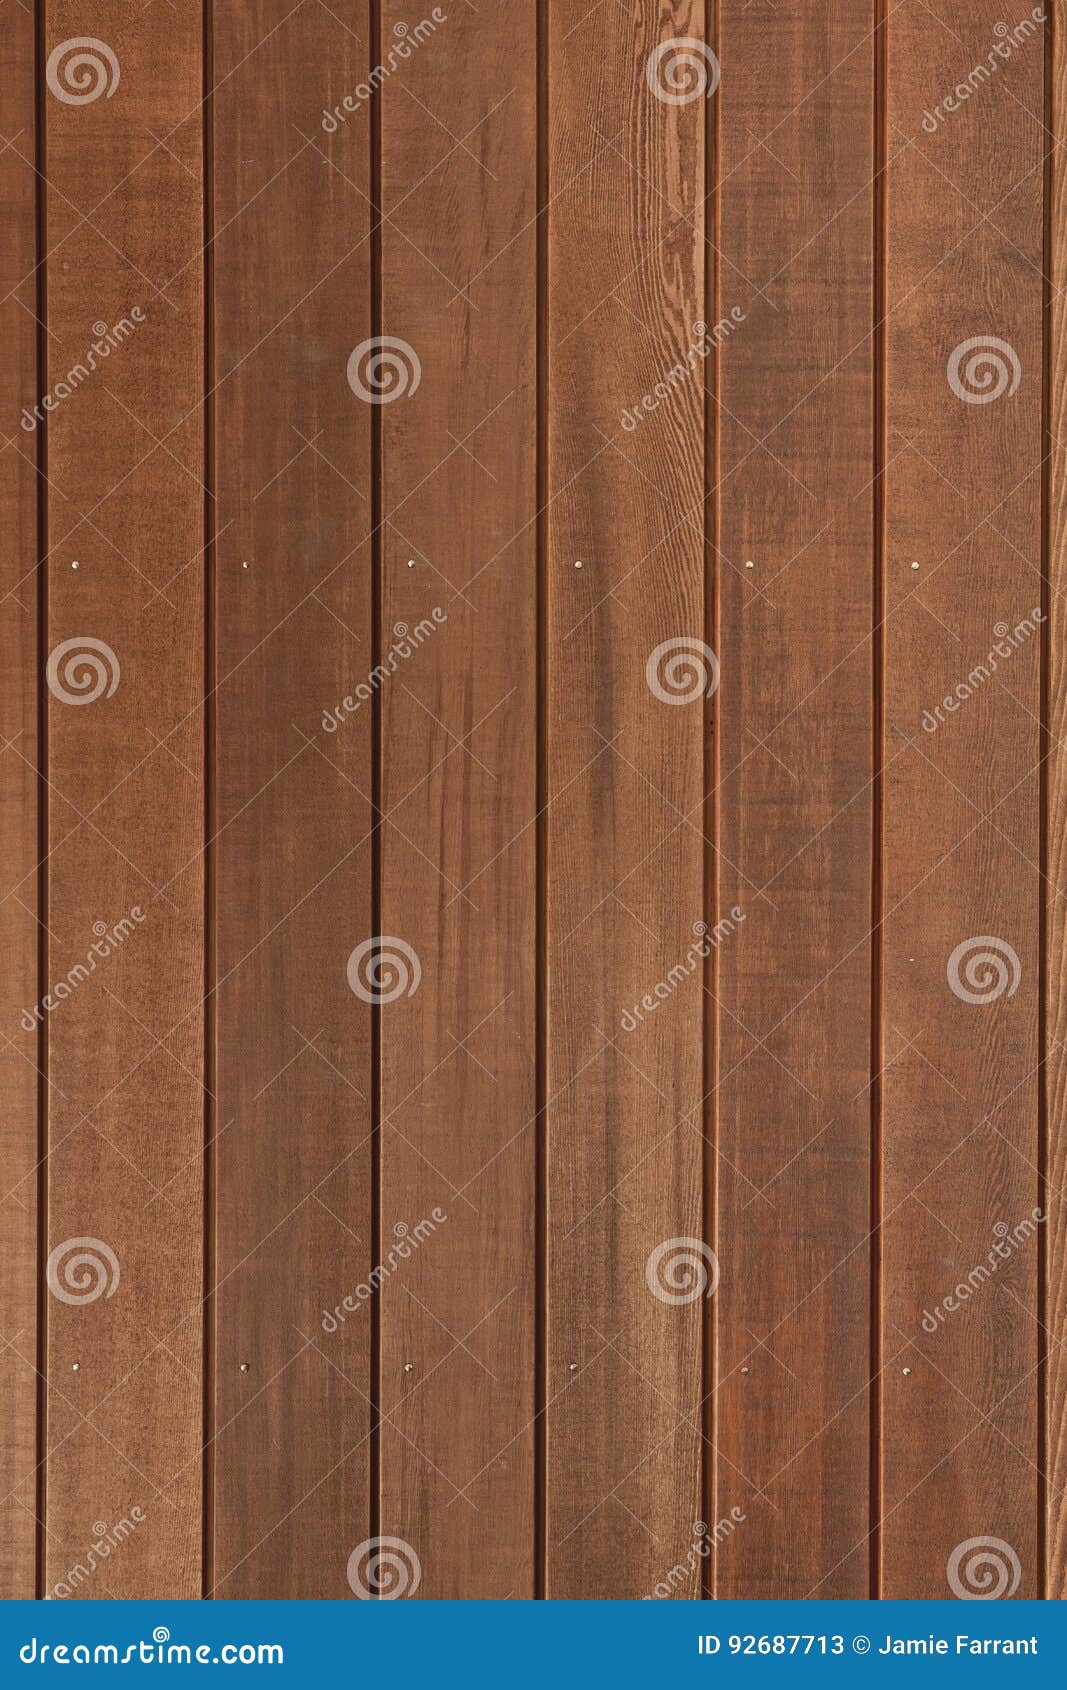 Cedar Wooden Wall Background Stock Image Image Of Wood